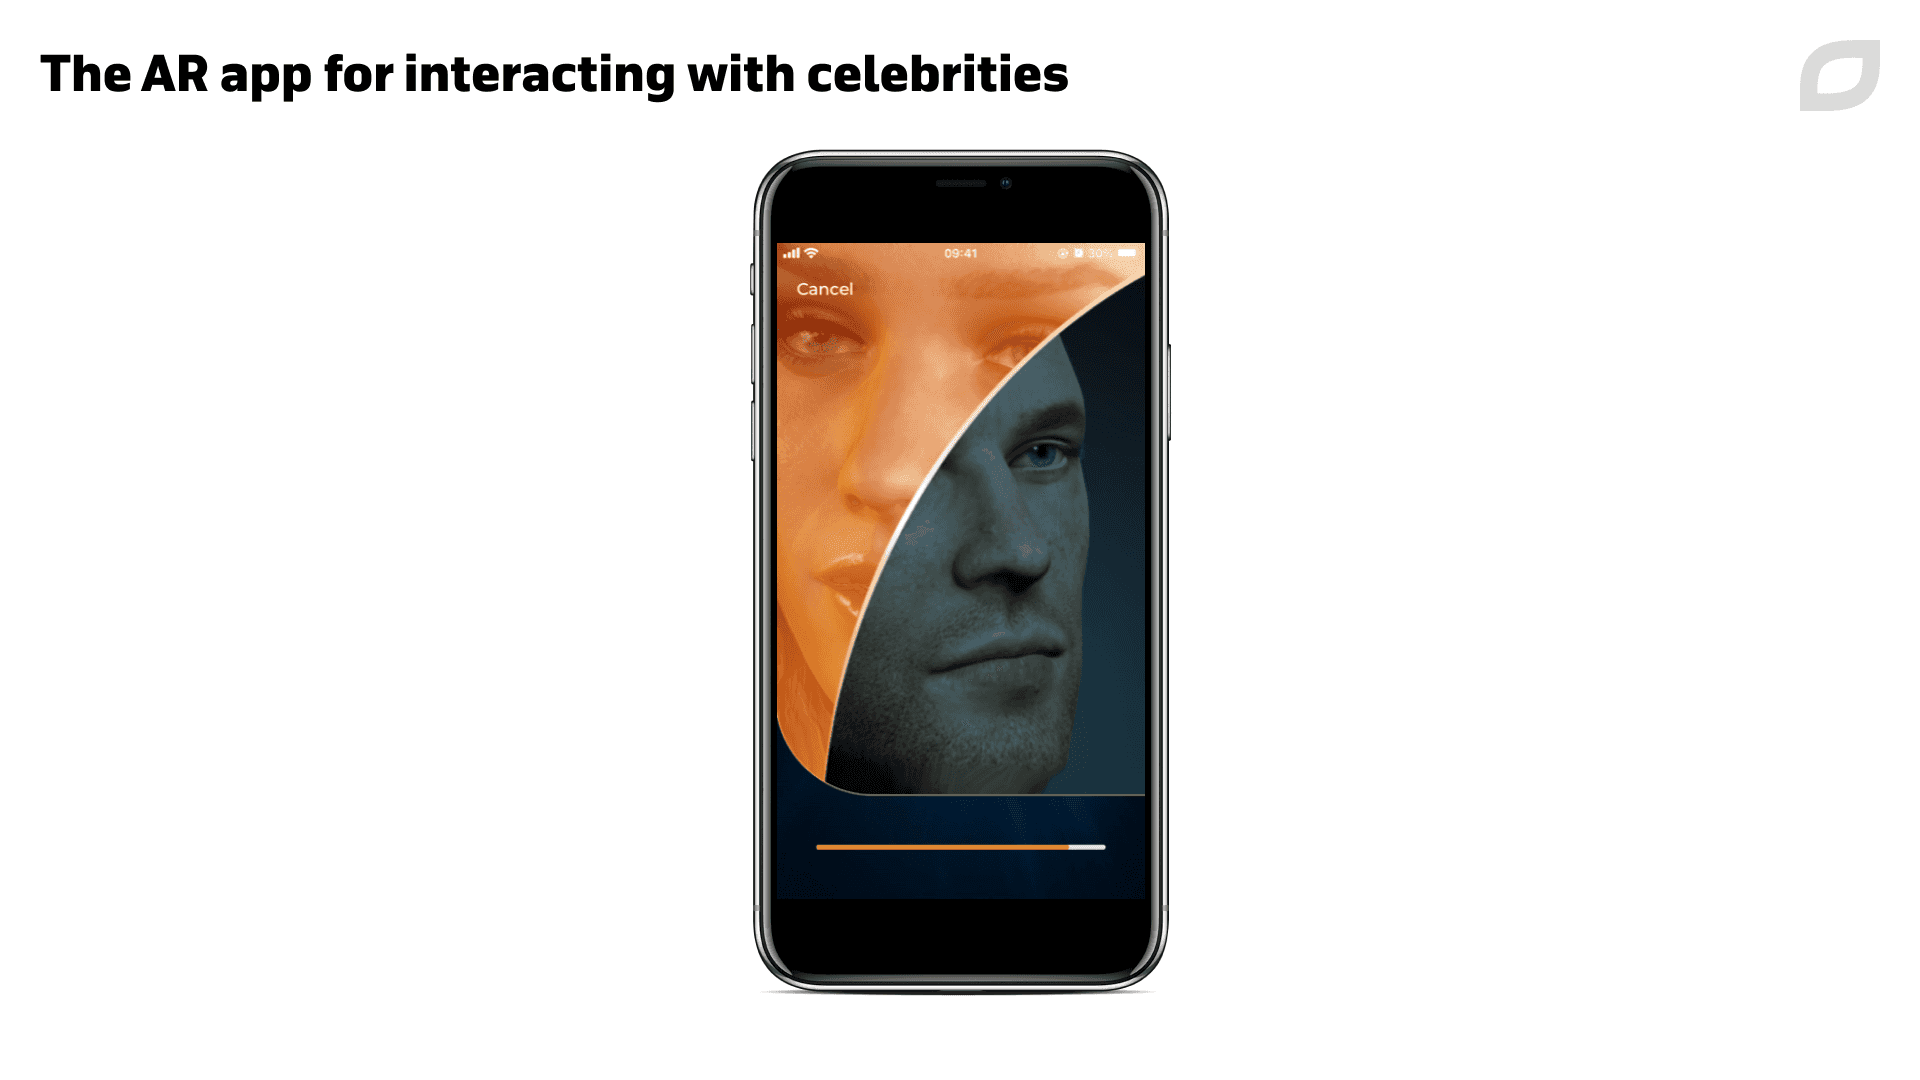 The AR app for interacting with celebrities